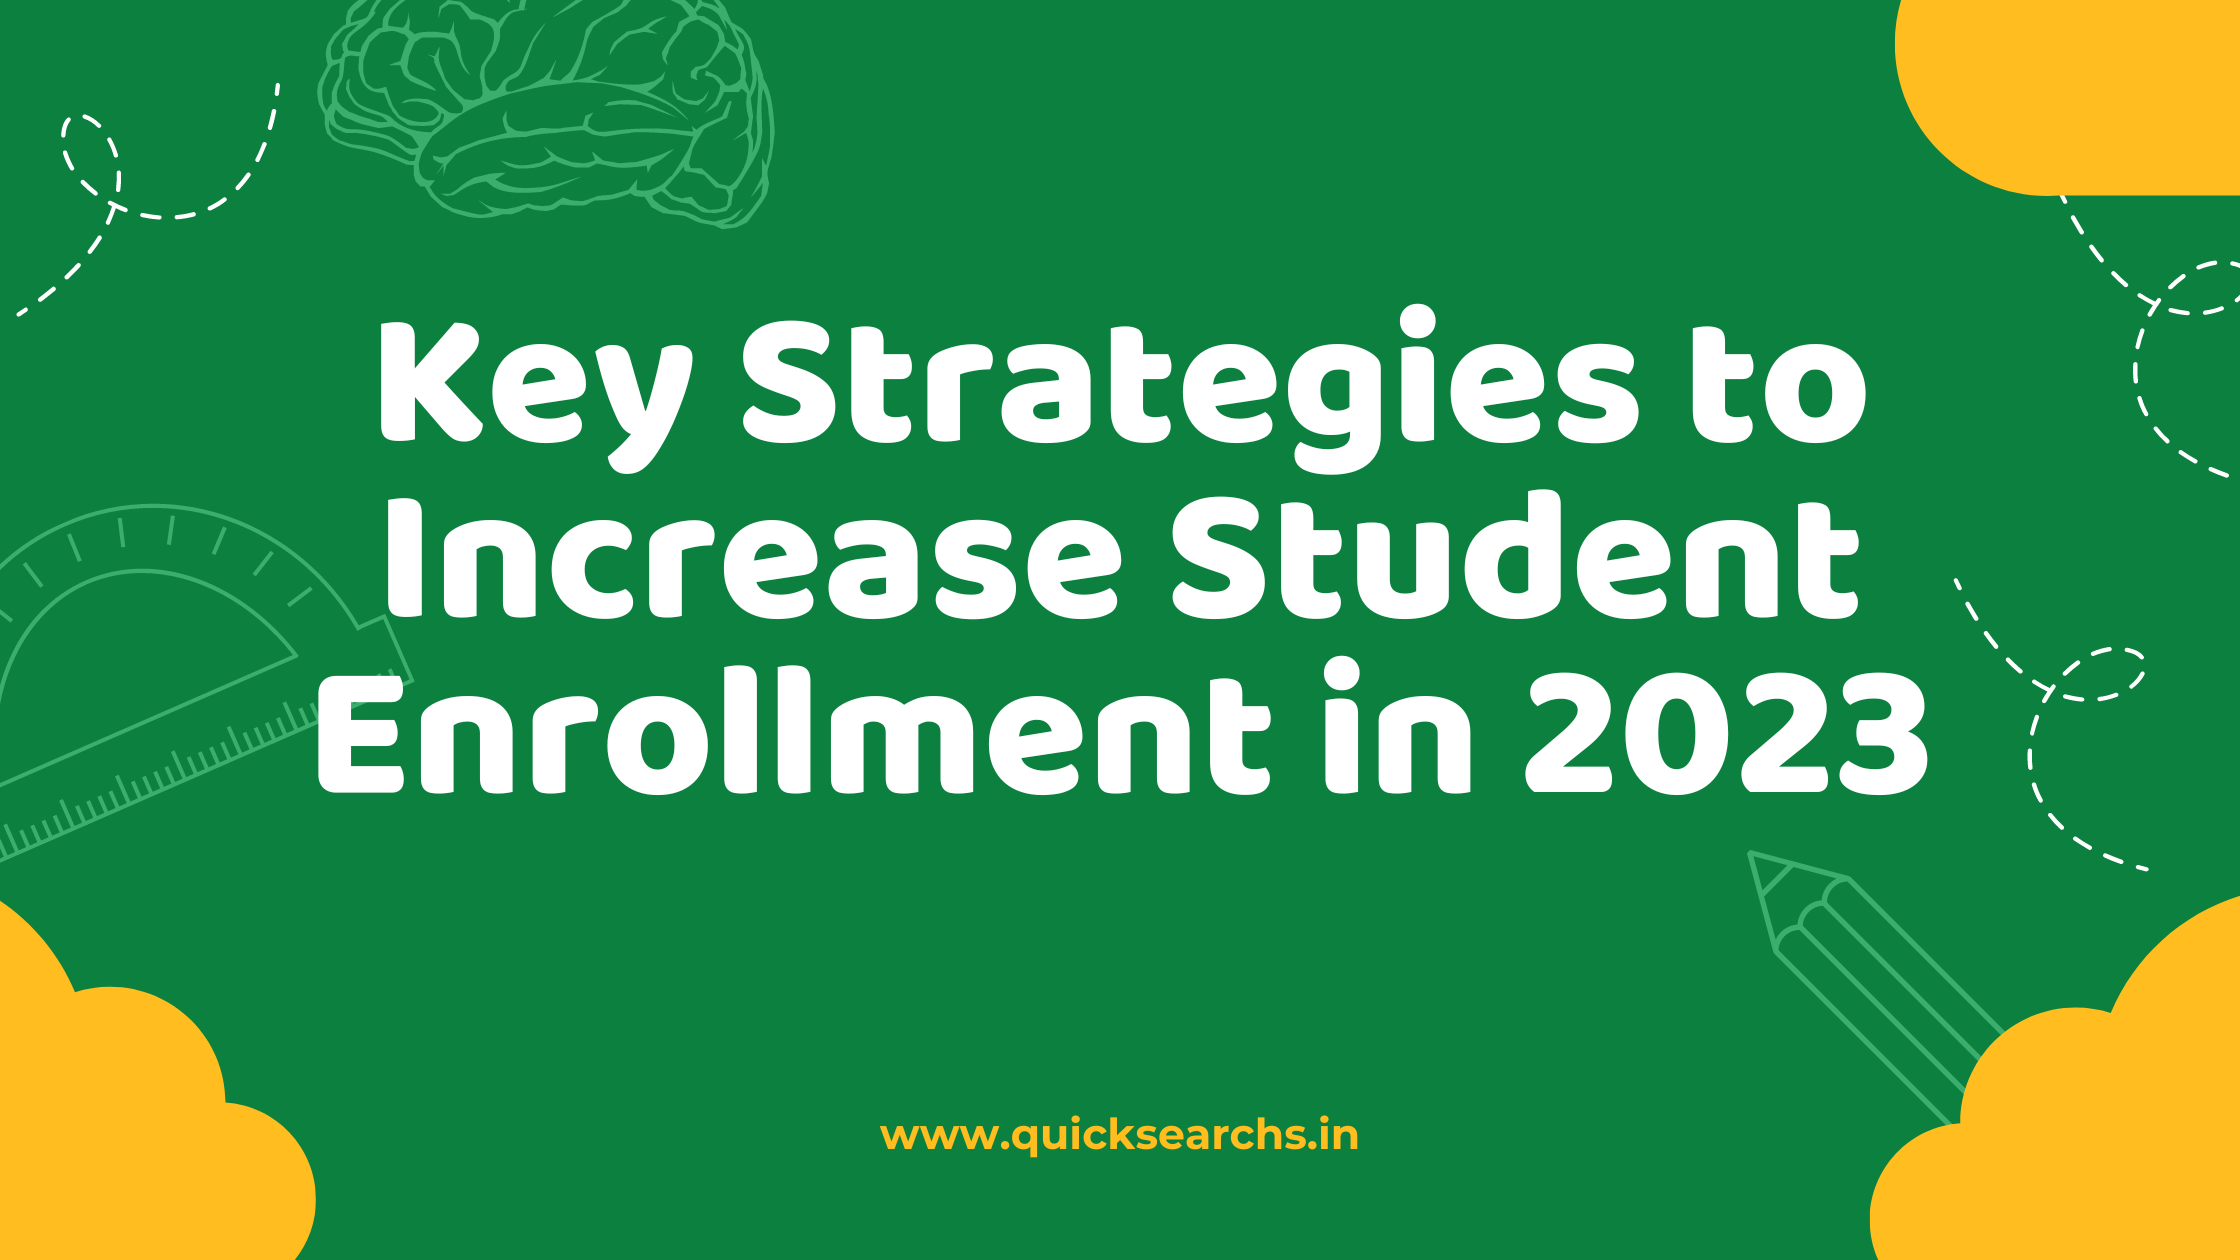 Key Strategies to Increase Student Enrollment in 2023